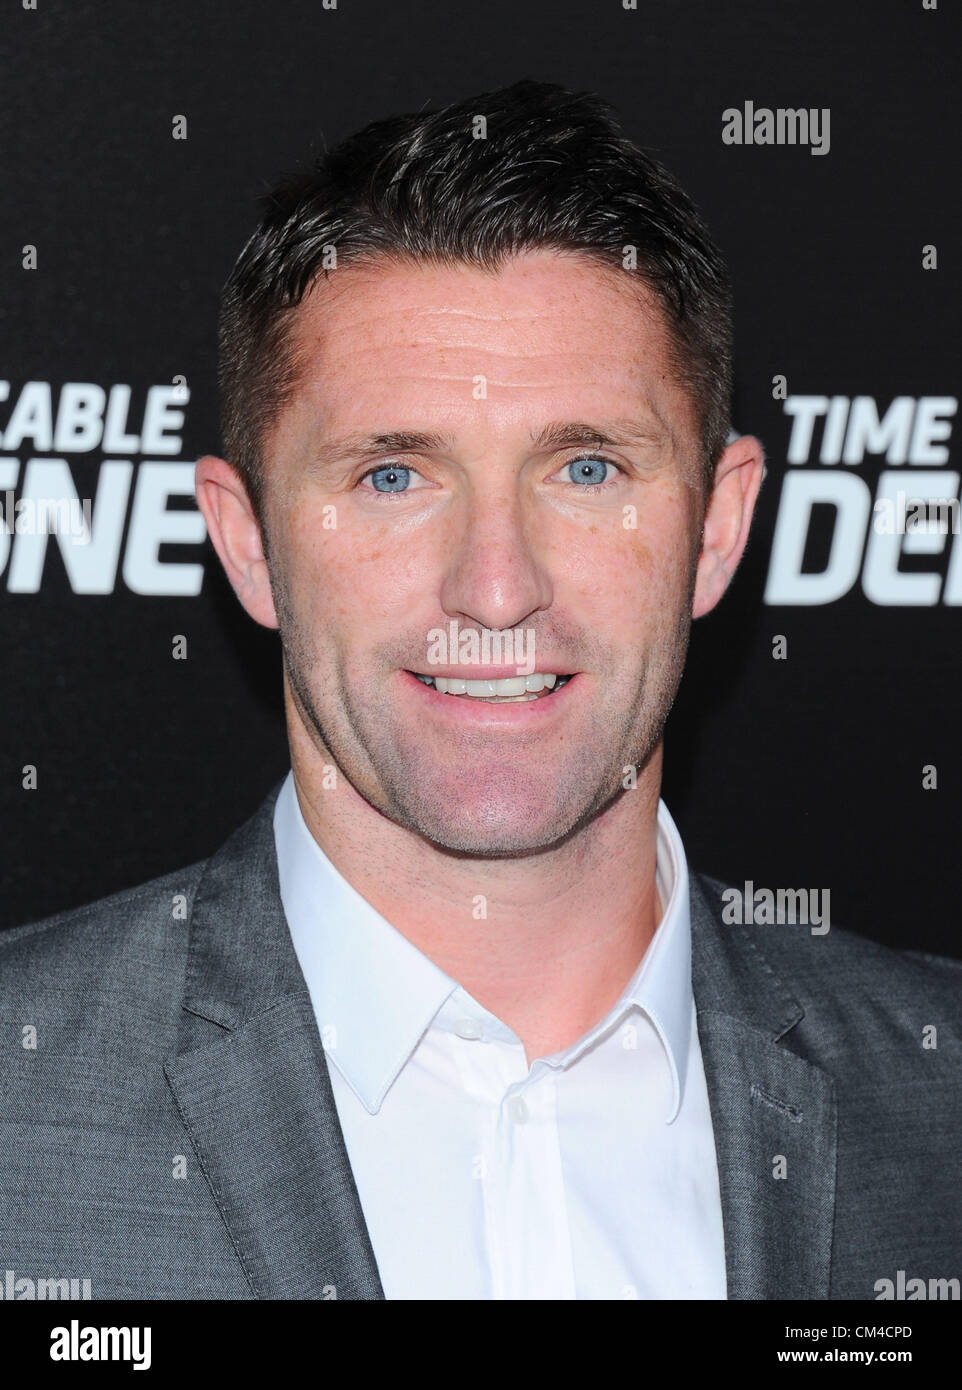 Robbie Keane arrives at the Time Warner cable sports TV channel launch in El Segundo, CA. 1st Oct 2012. USA. Stock Photo